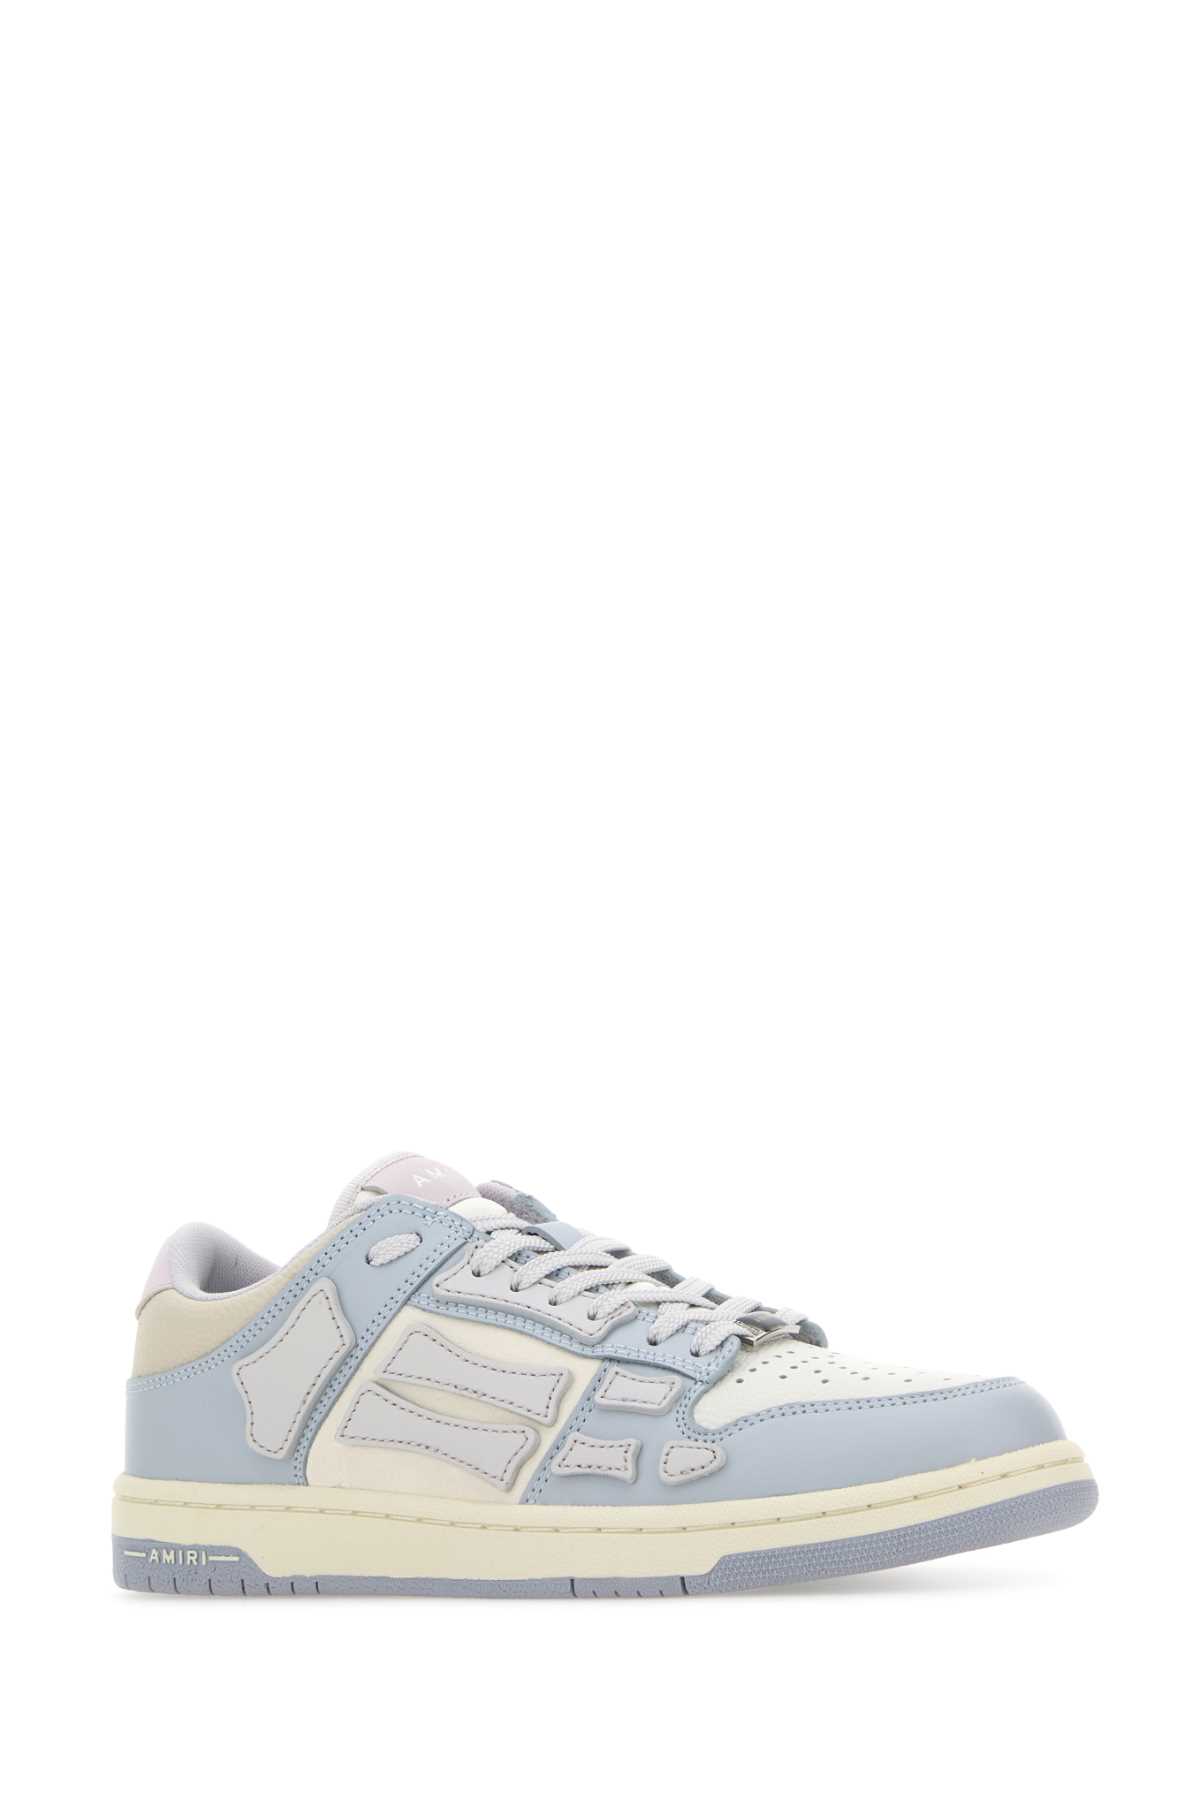 Shop Amiri Two-tone Leather Skel Sneakers In Greyblue